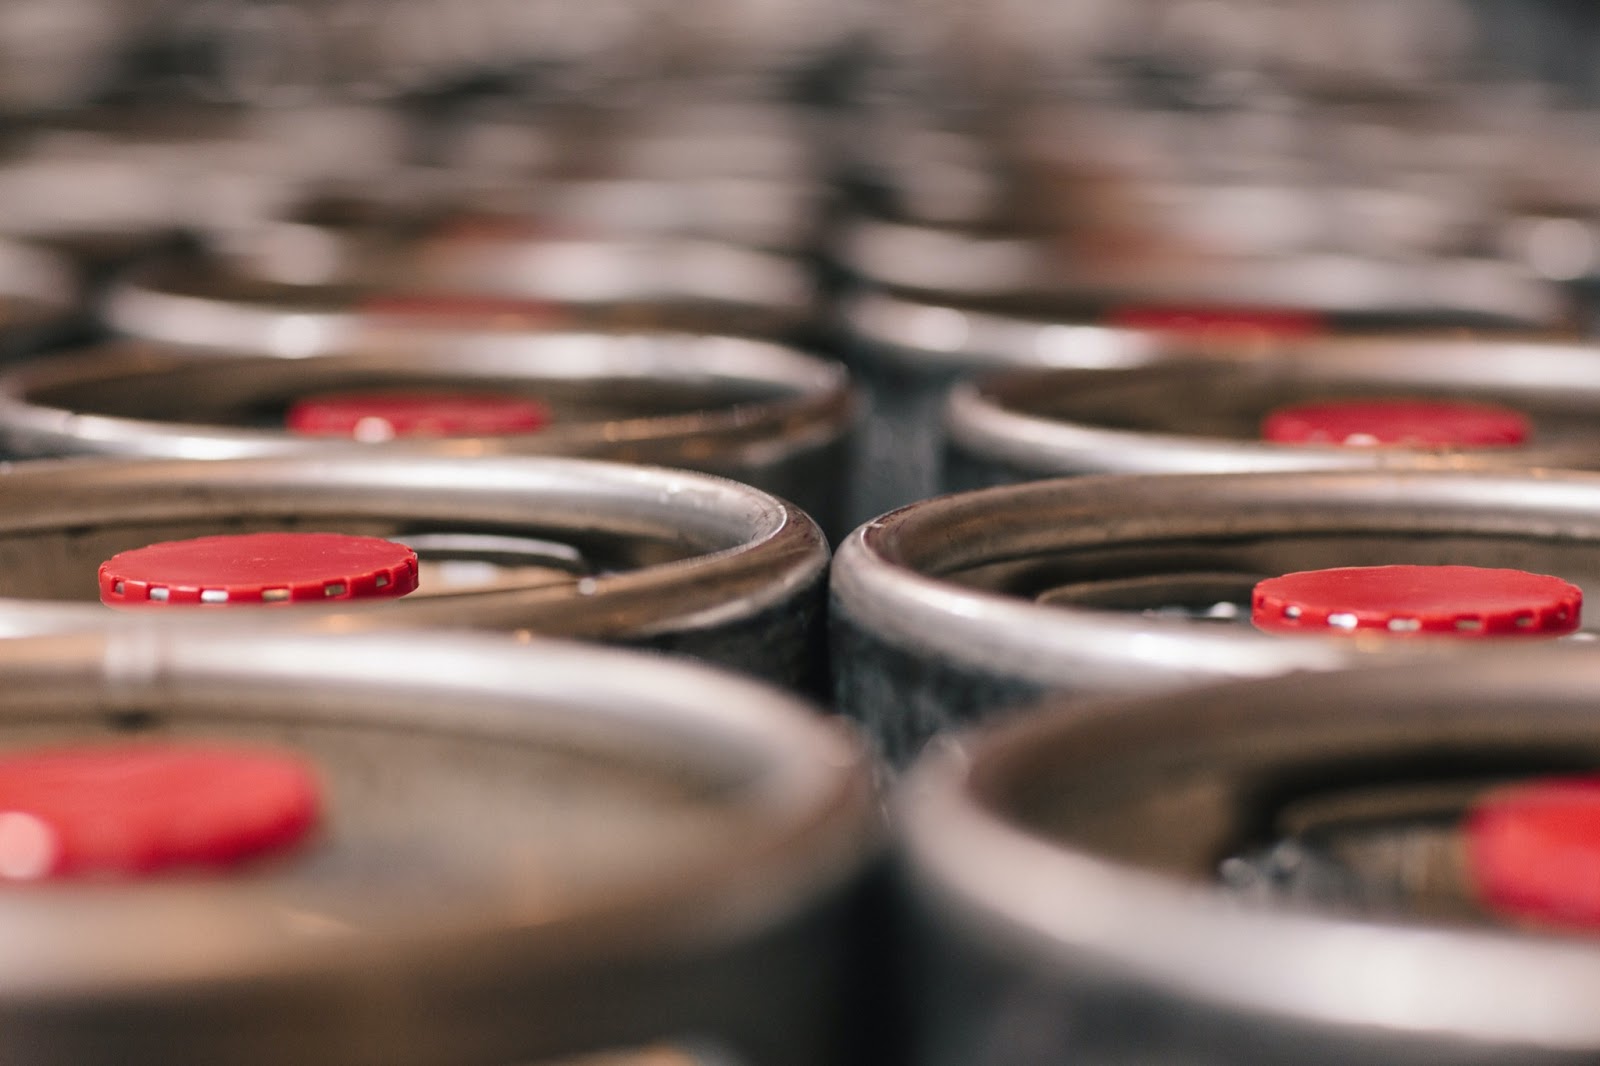 Rows of untapped beer kegs are pictured up-close.